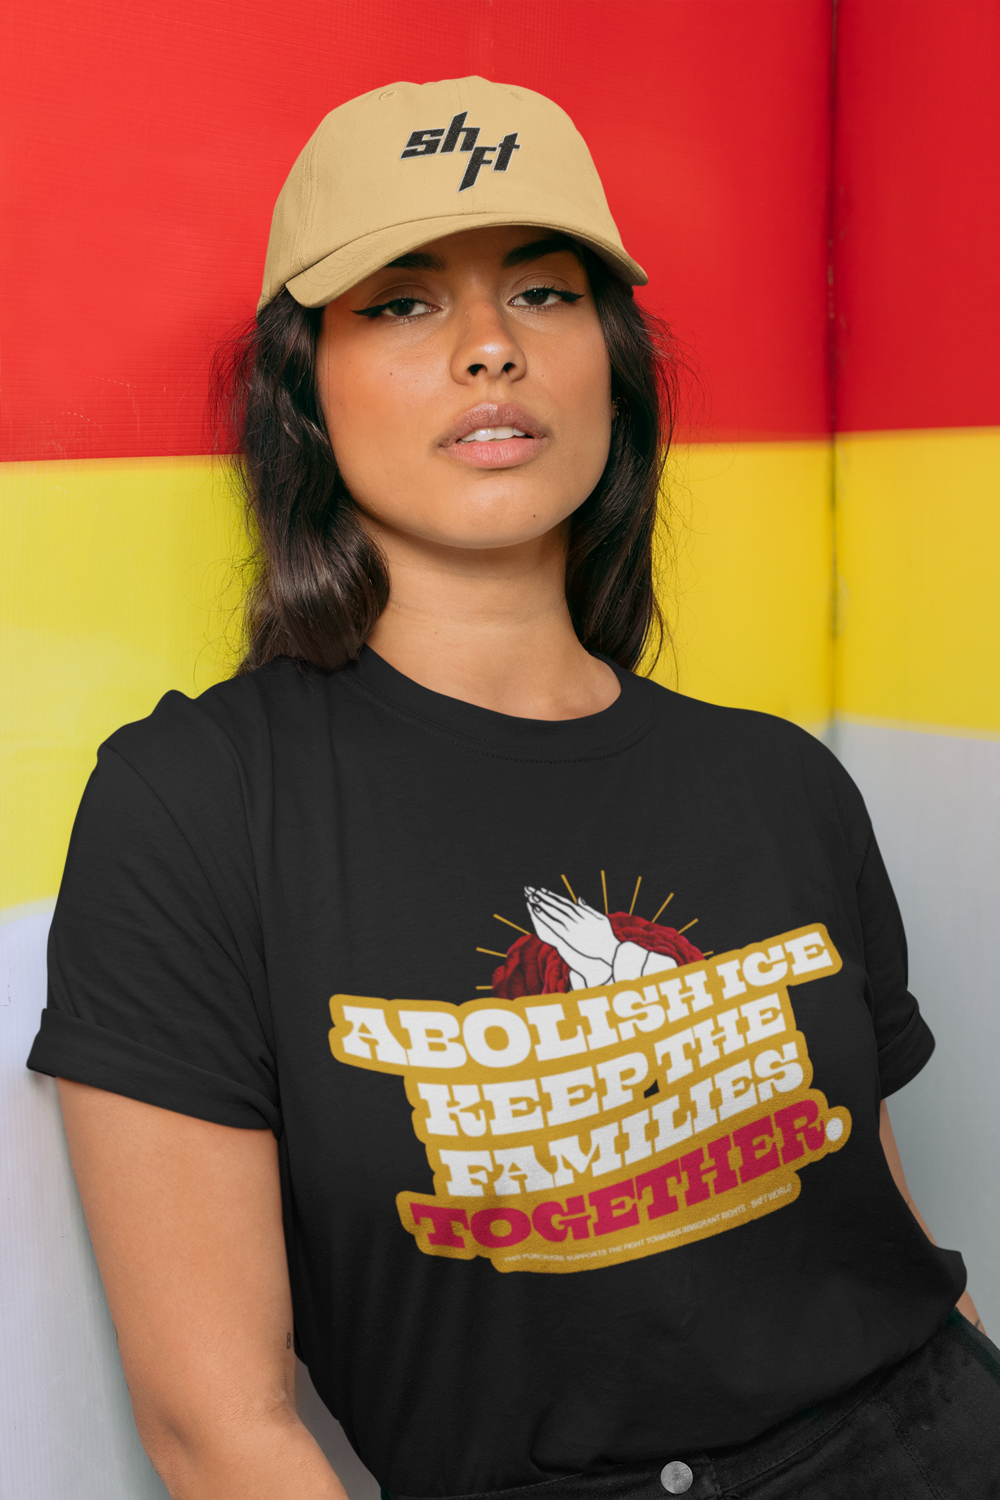 Abolish ICE Immigrant AF Shirt Latinx Owned Shop Eco Friendly Product No One Is Illegal We Are All Immigrants Unisex Cotton T-Shirt